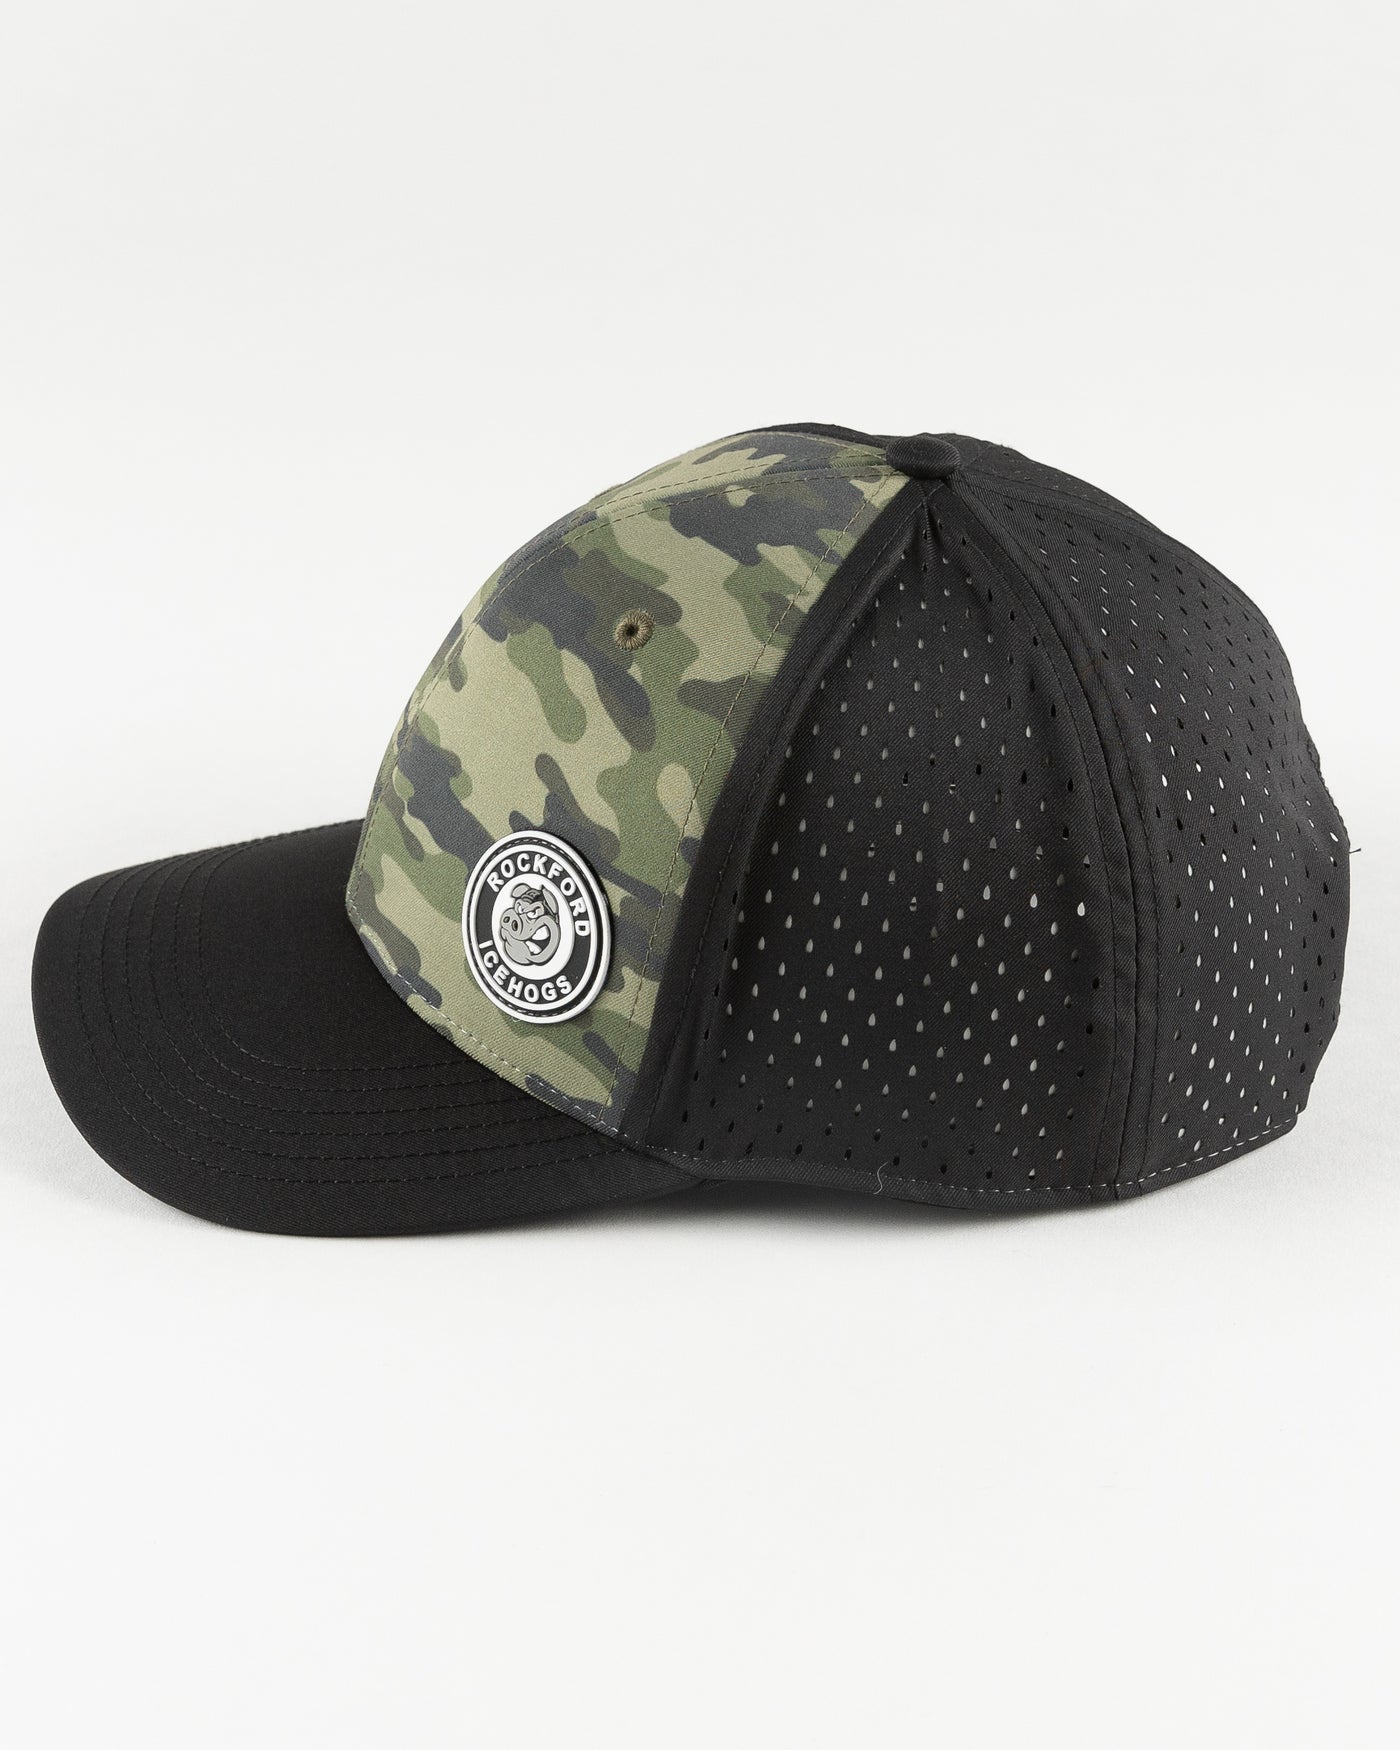 black and camo Rockford IceHogs adjustable cap - left side lay flat